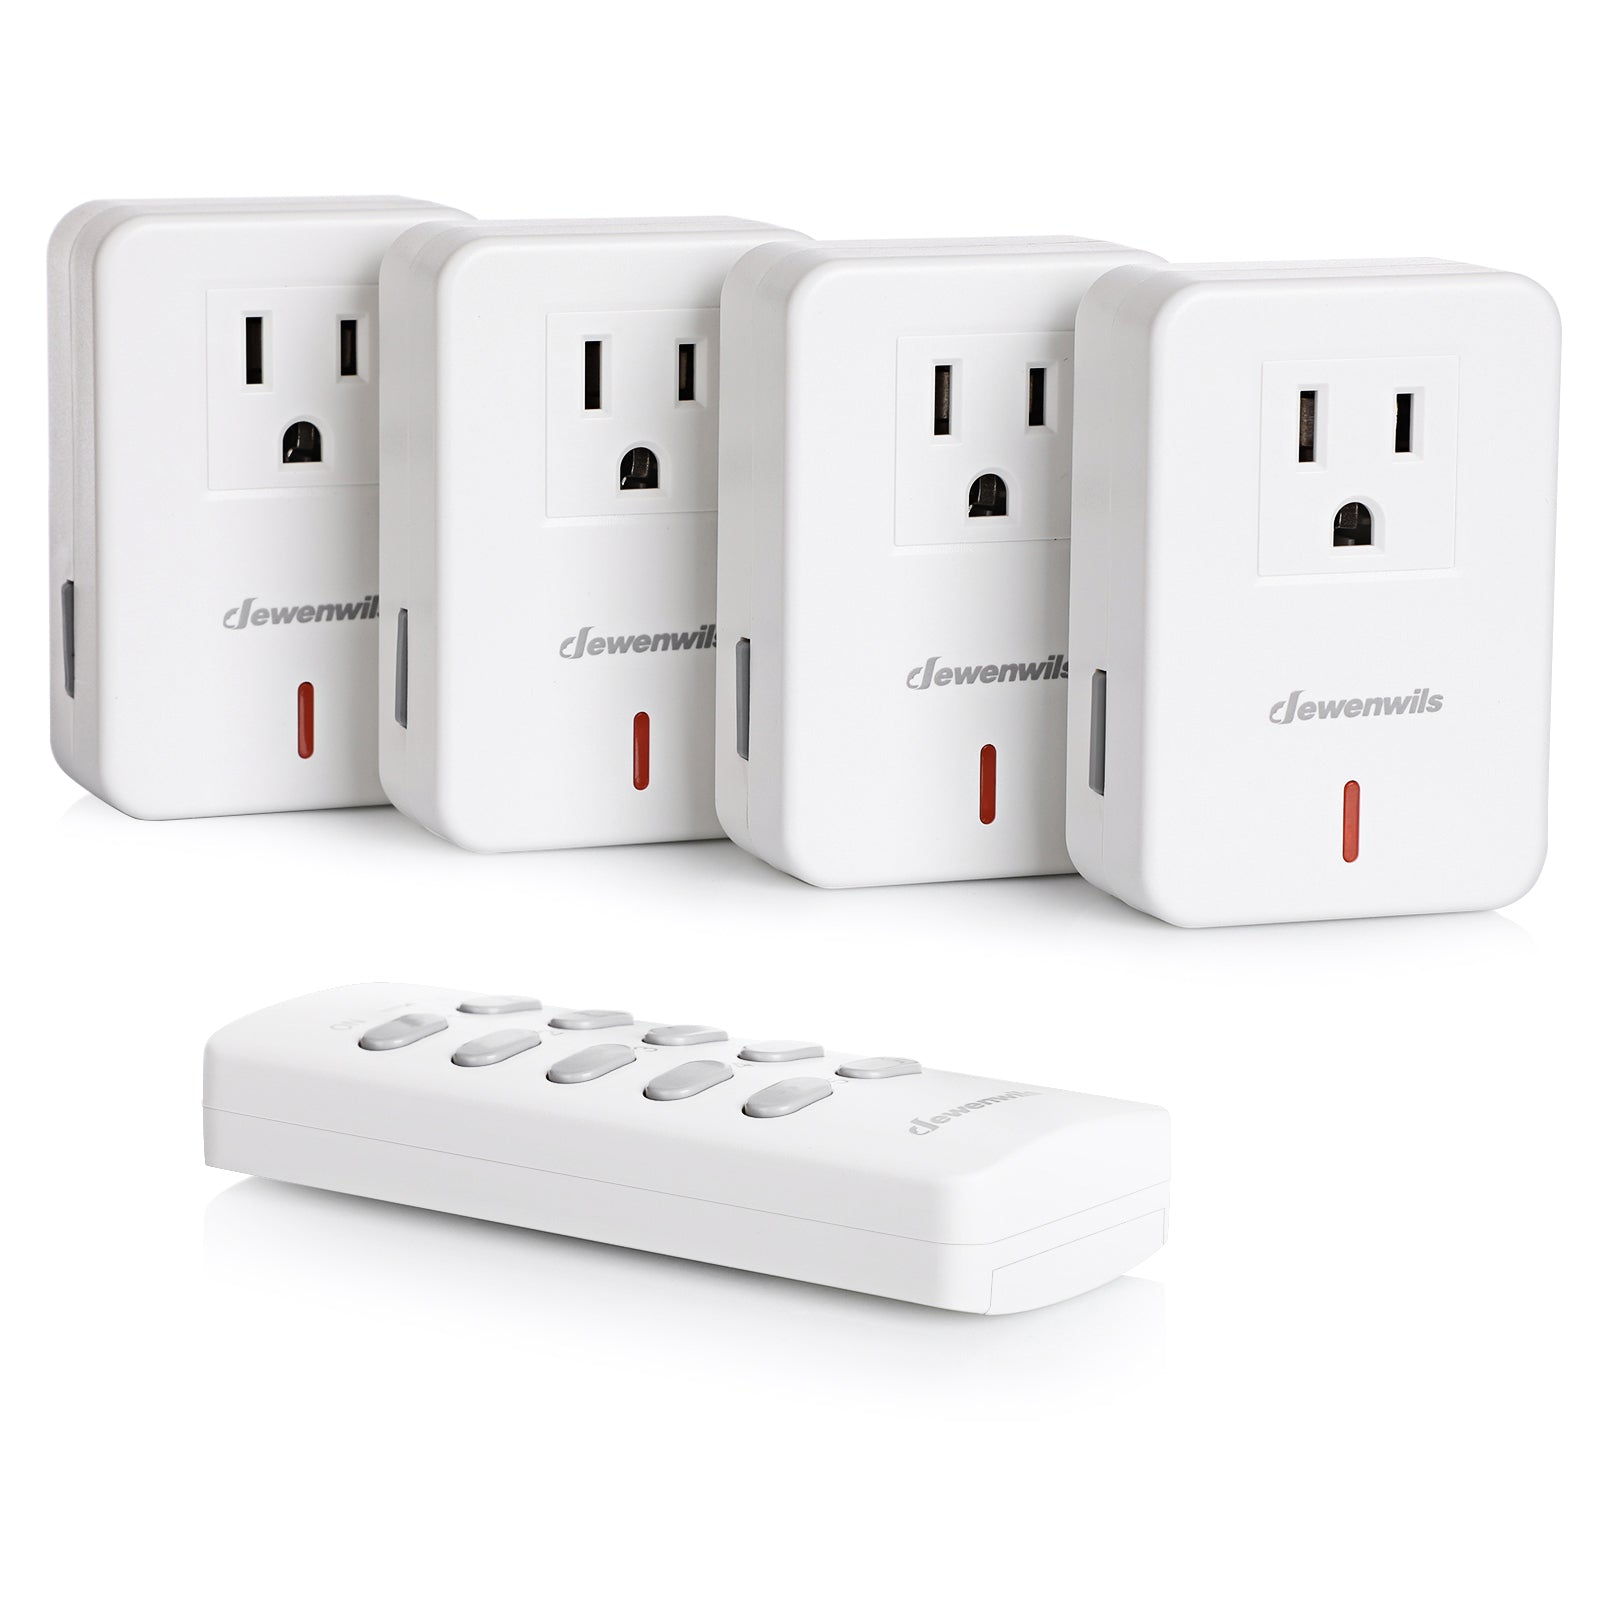 Discounted Remote Control Outlets from $5 - Great for Christmas Tree